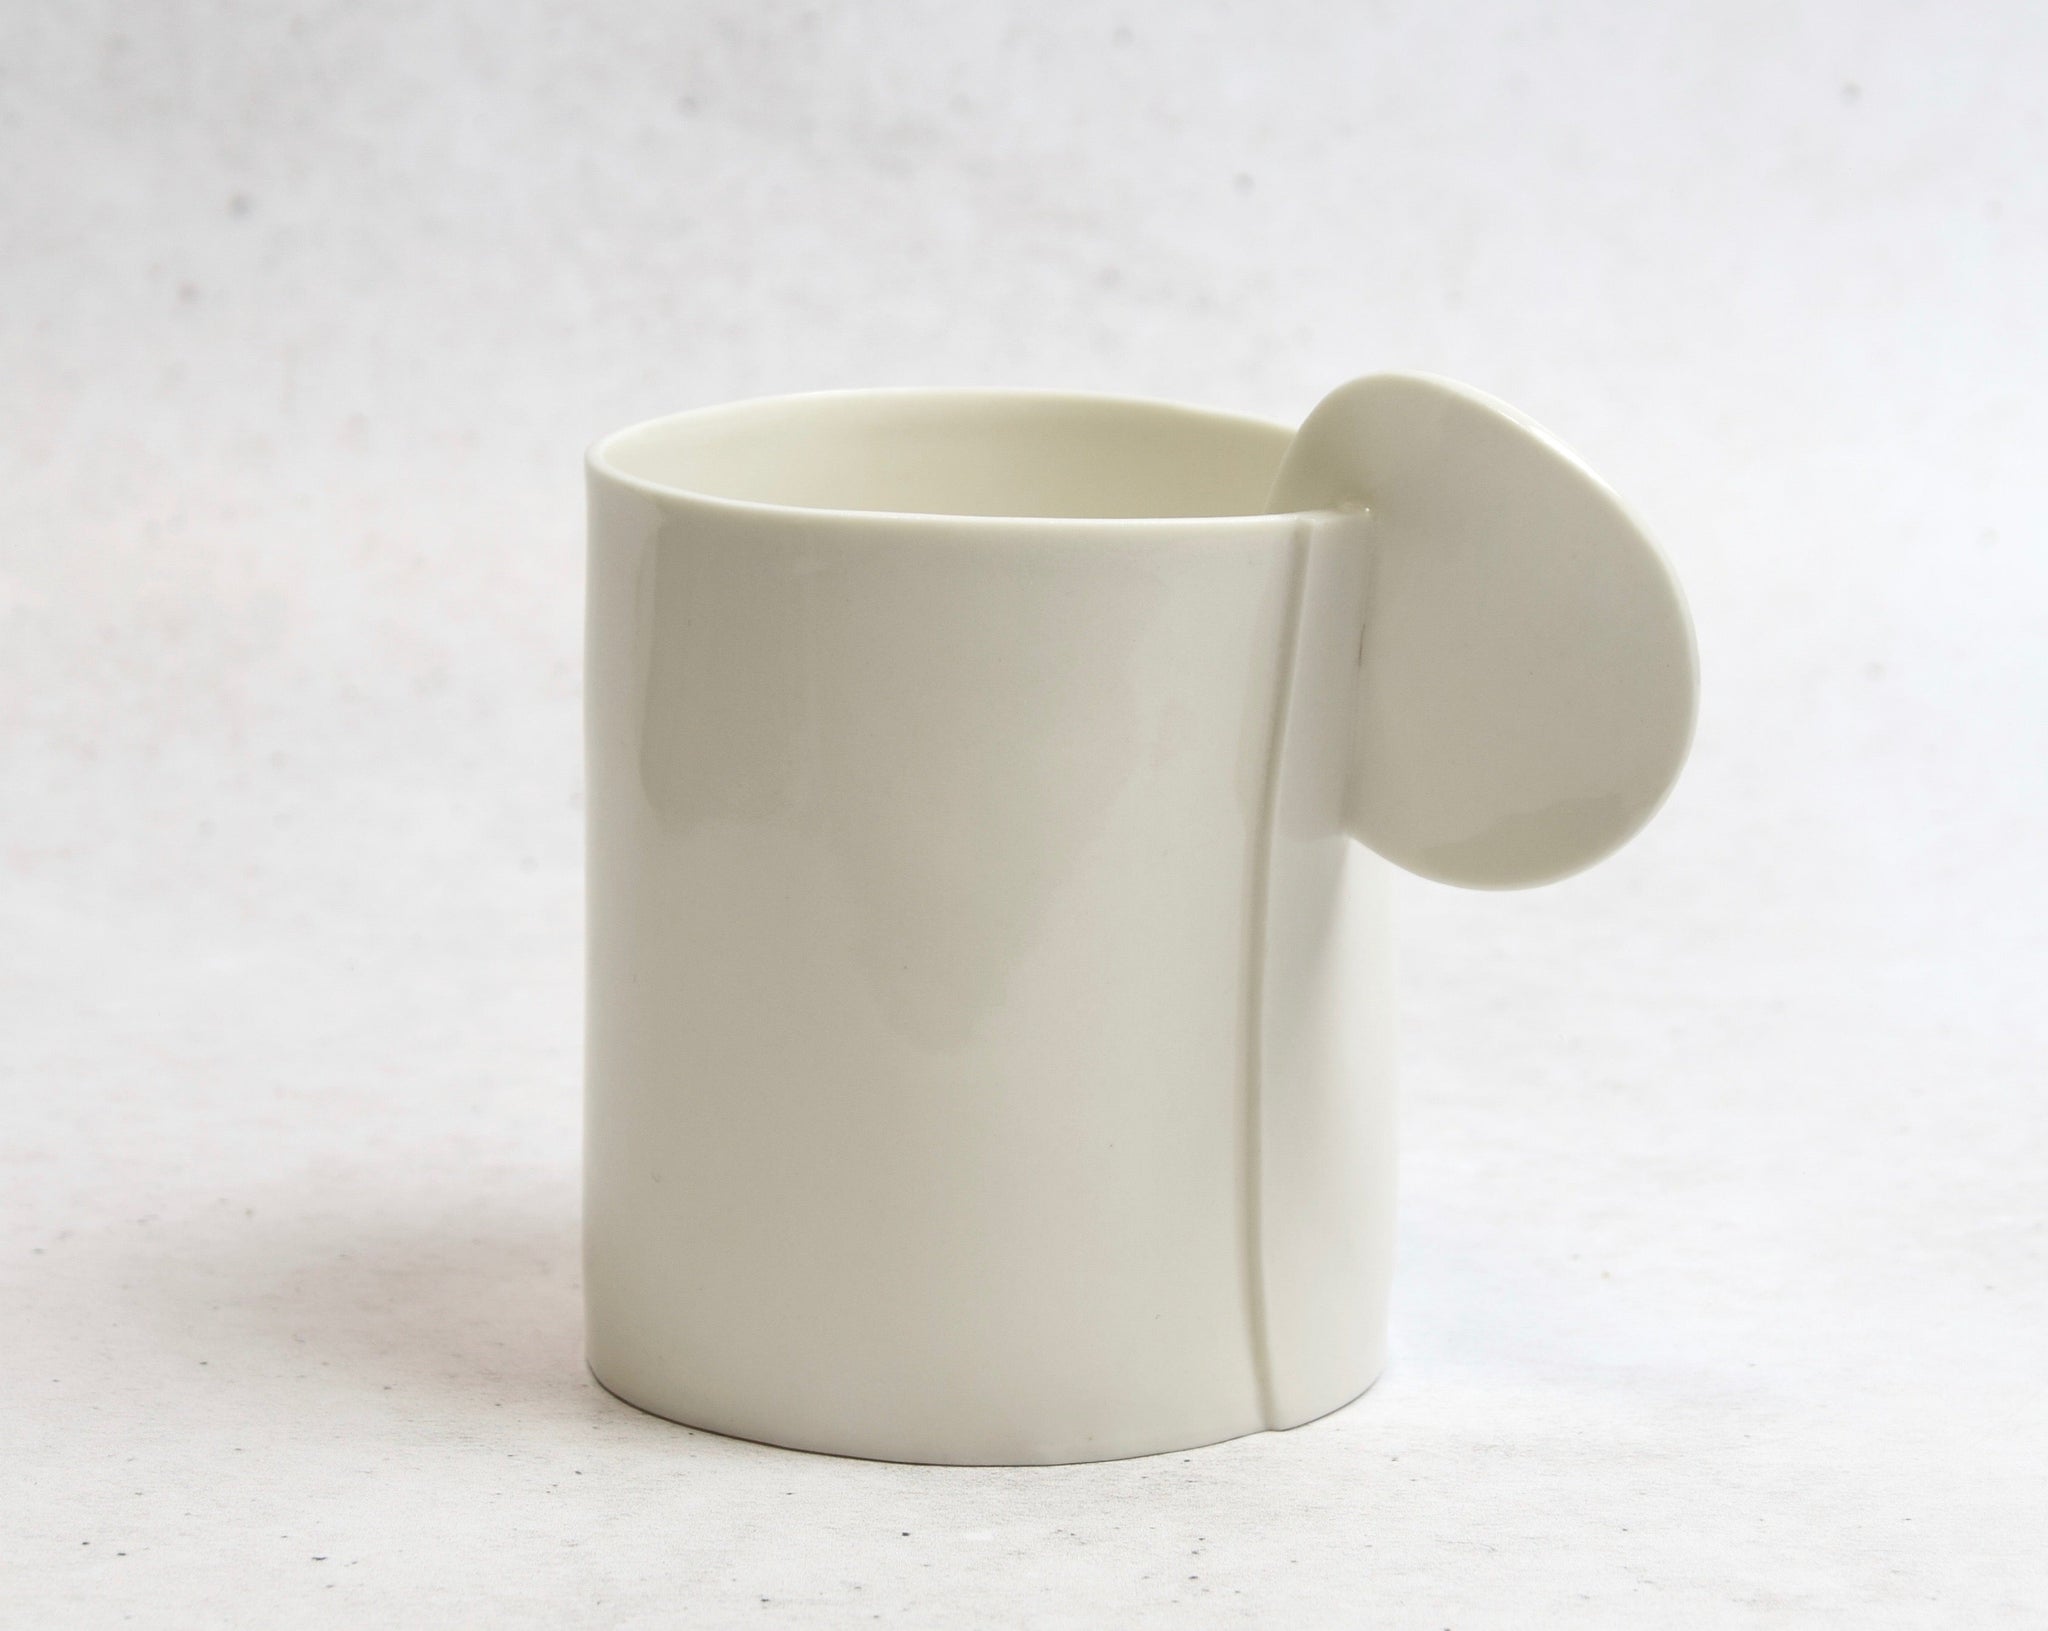 Extra Large Tea Cups, white porcelain | ready to ship